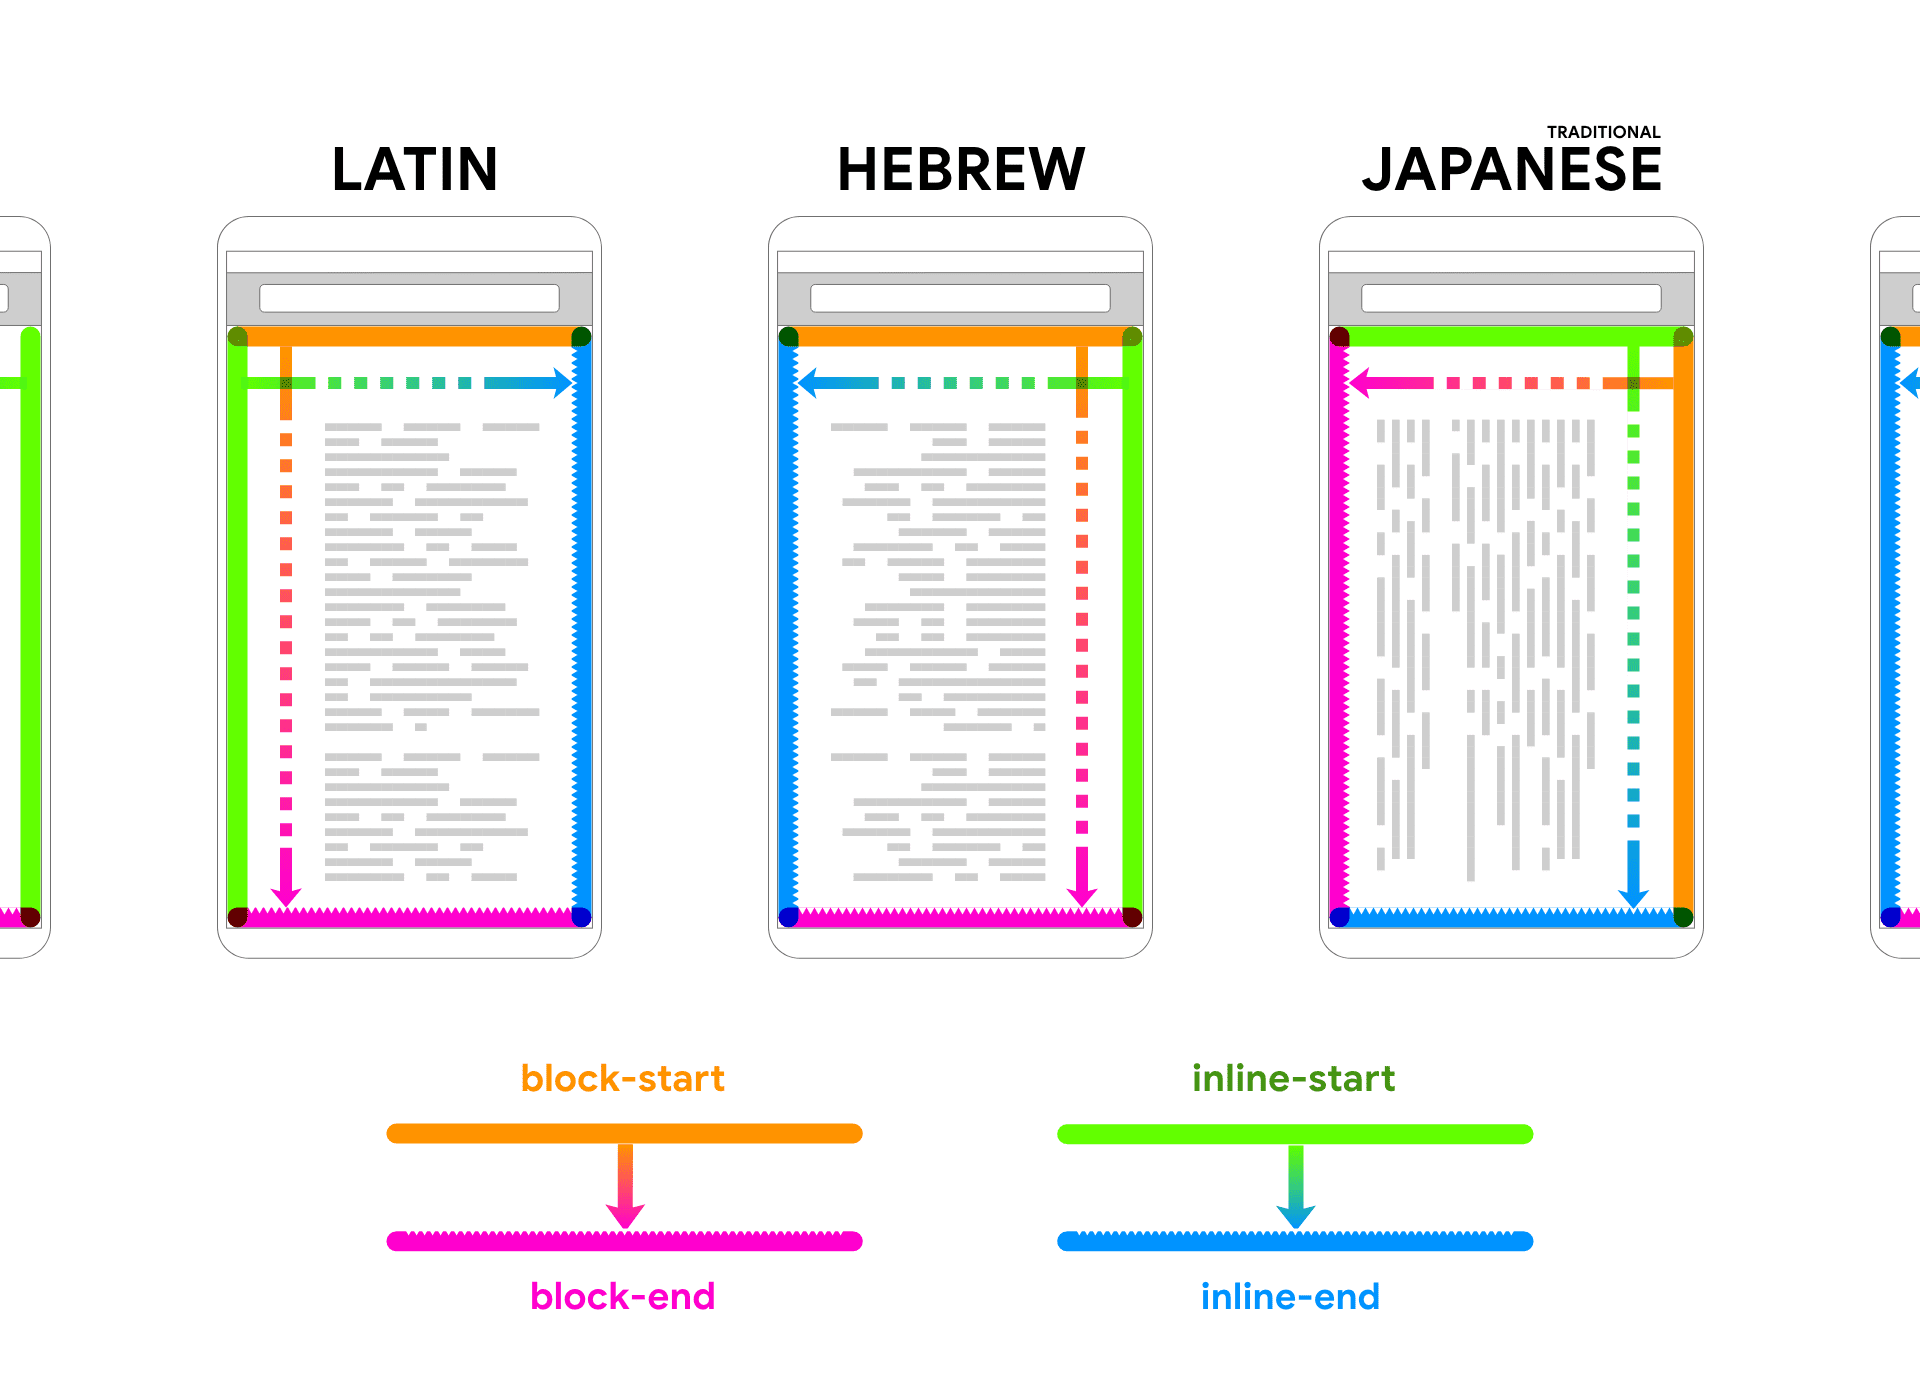 Latin, Hebrew and Japanese are shown rendering placeholder text within a device frame. Arrows and colors follow the text to help associate the 2 directions of block and inline.